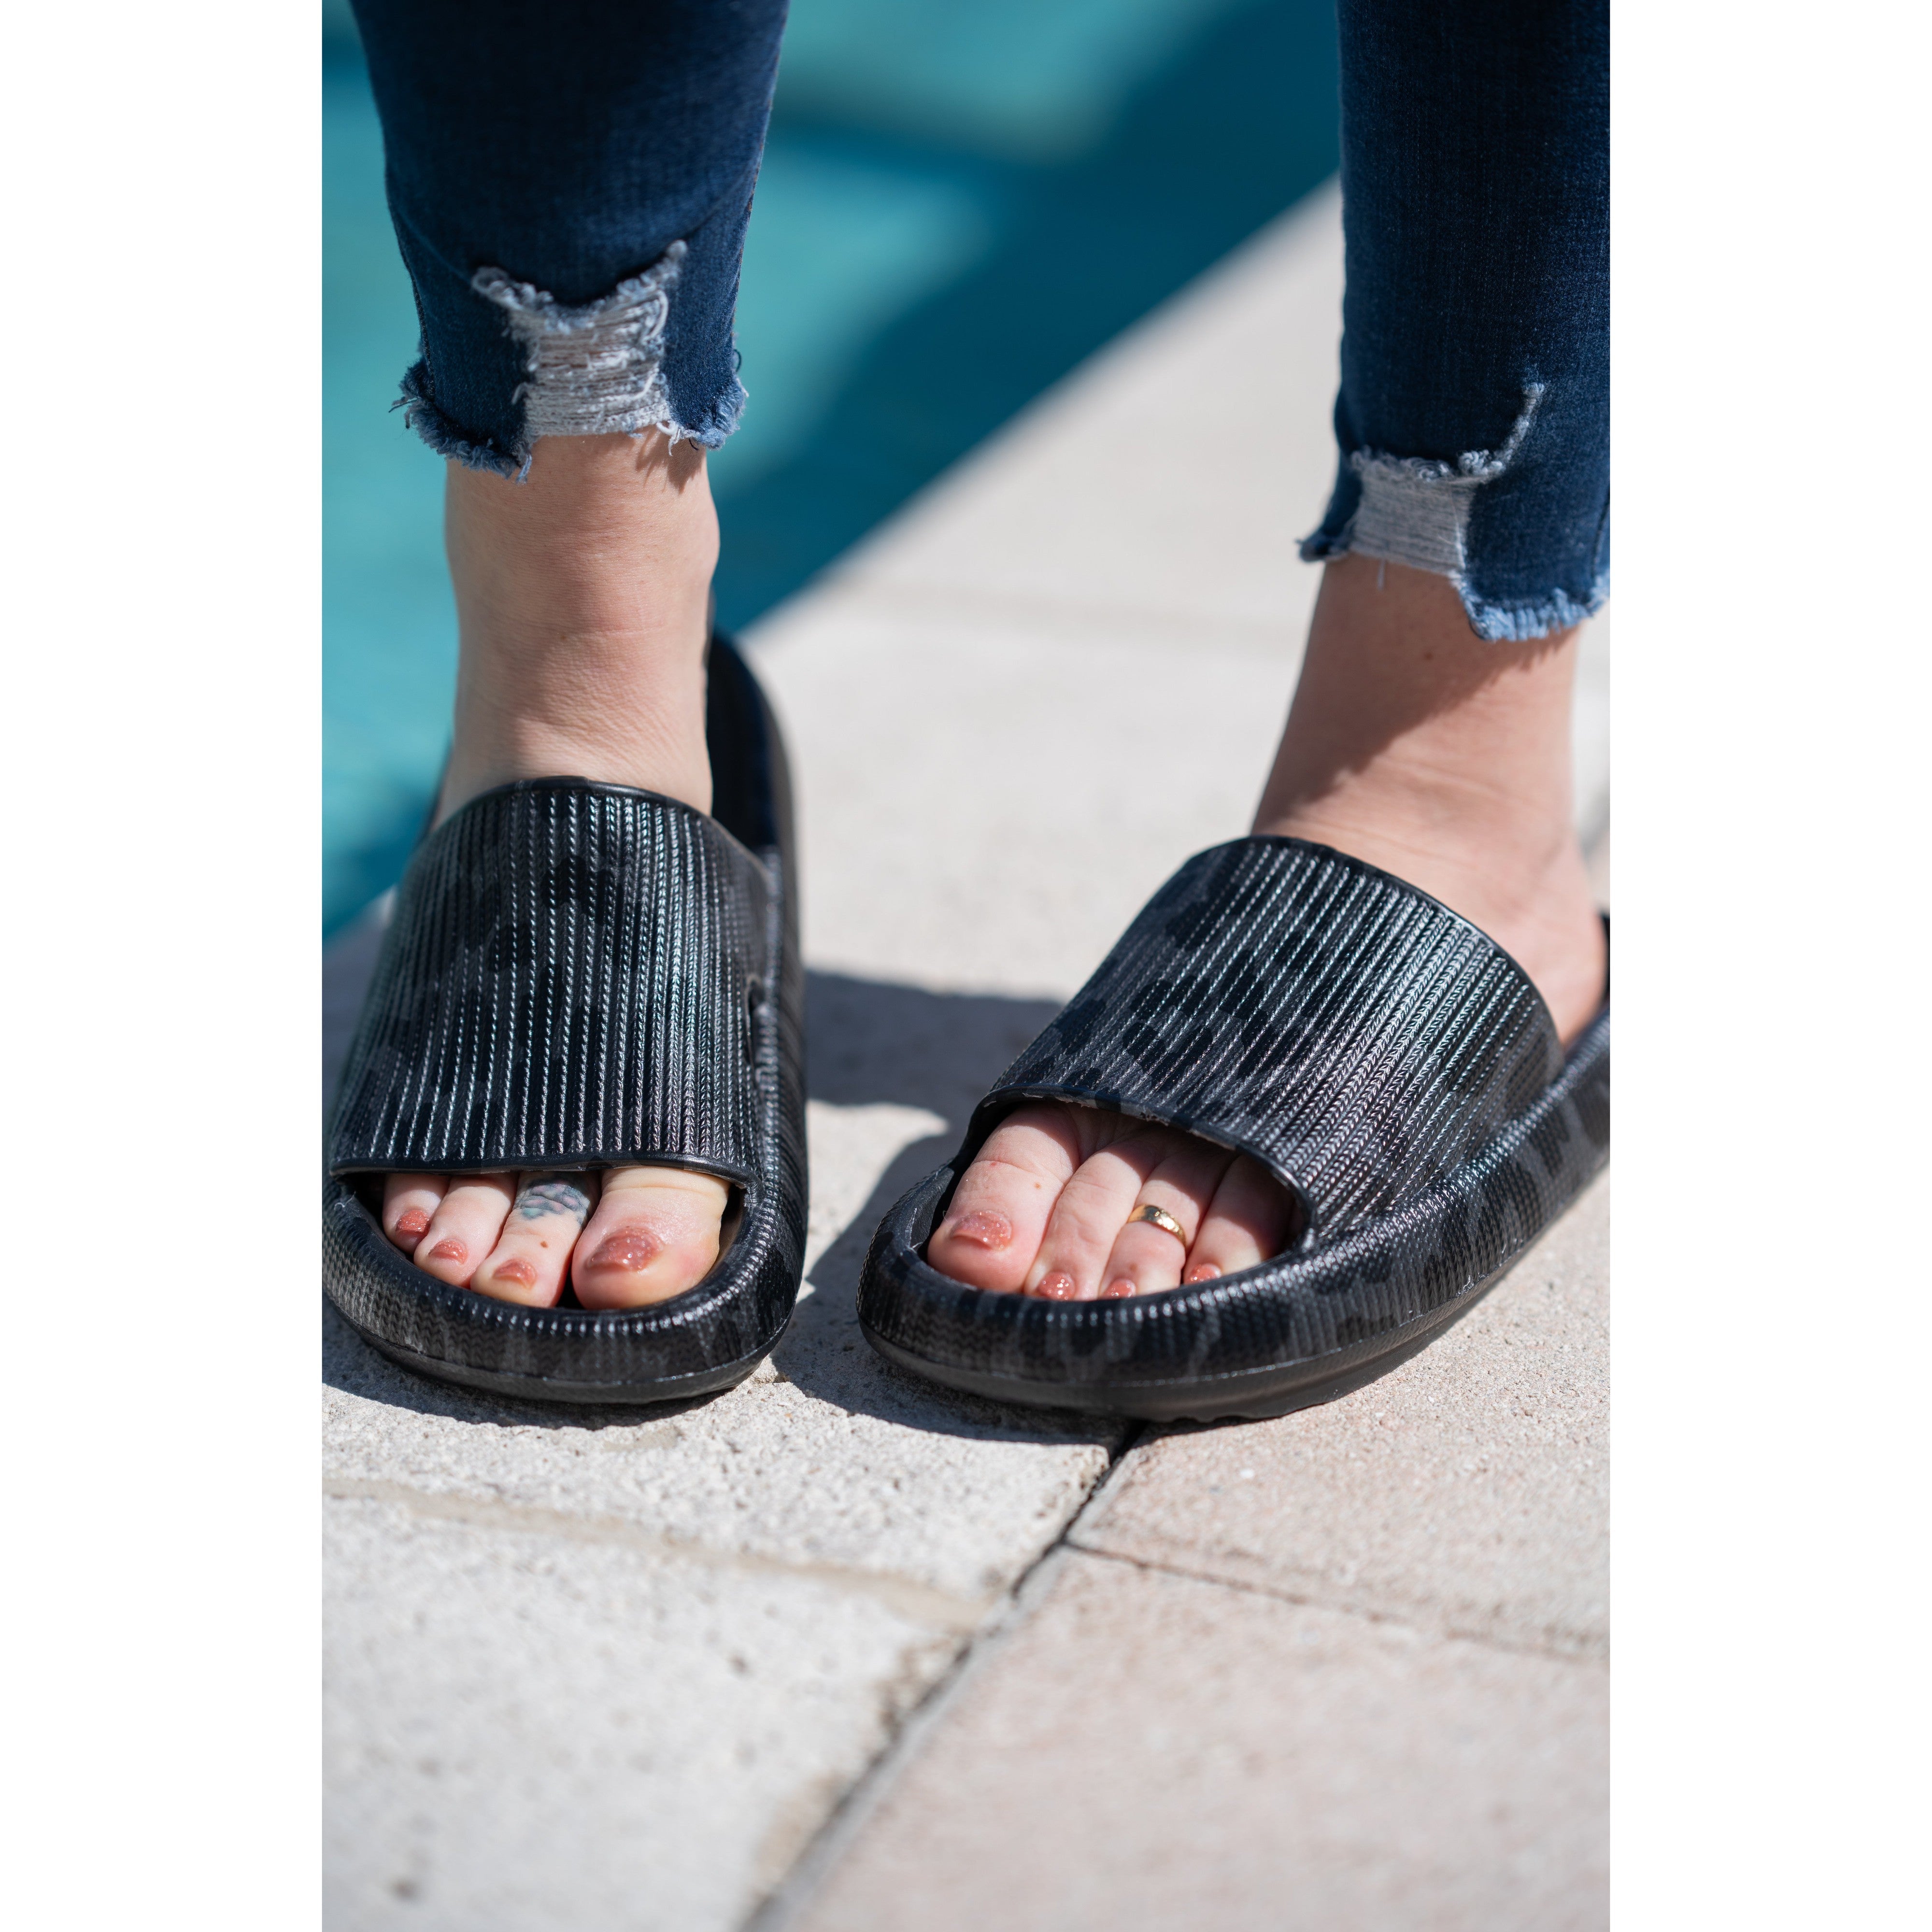 BLACK LEOPARD  Insanely Comfy - Beach or Casual Slides